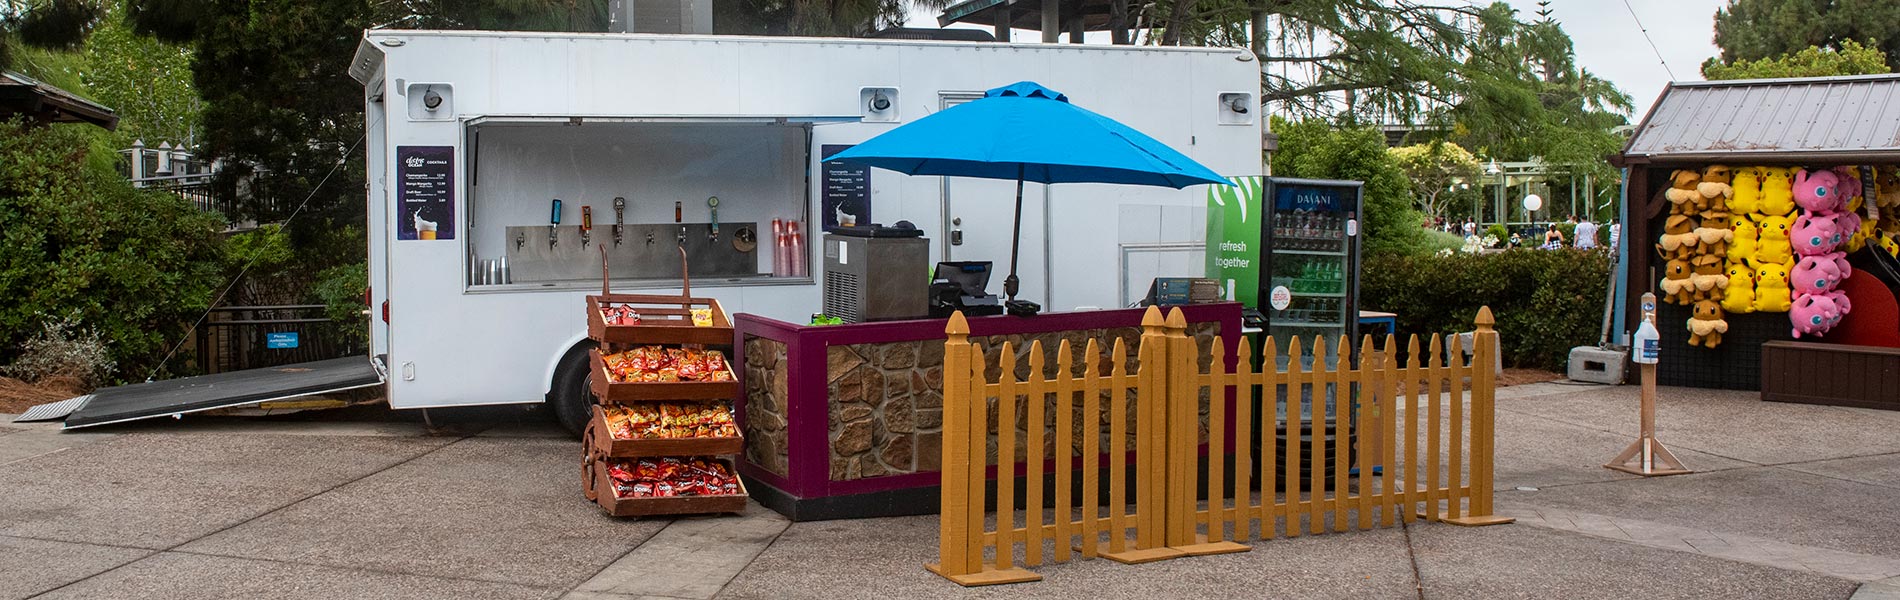 Craft Beer Stand at SeaWorld San Diego